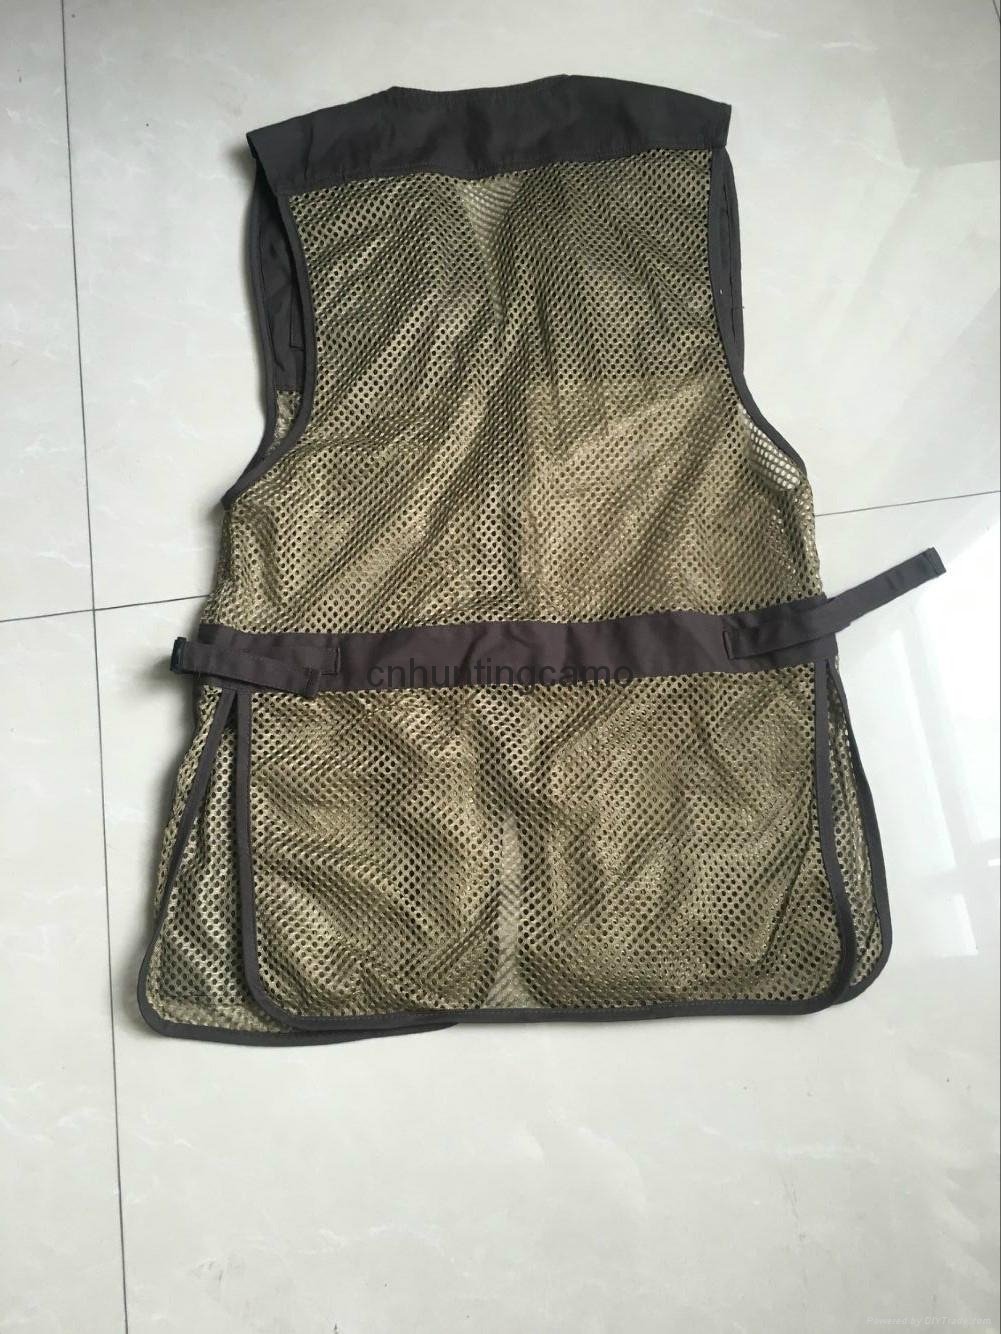  Hunter Clay Target Pigeon Shooting Vest With Recoil Pad And Shell Pocket 4